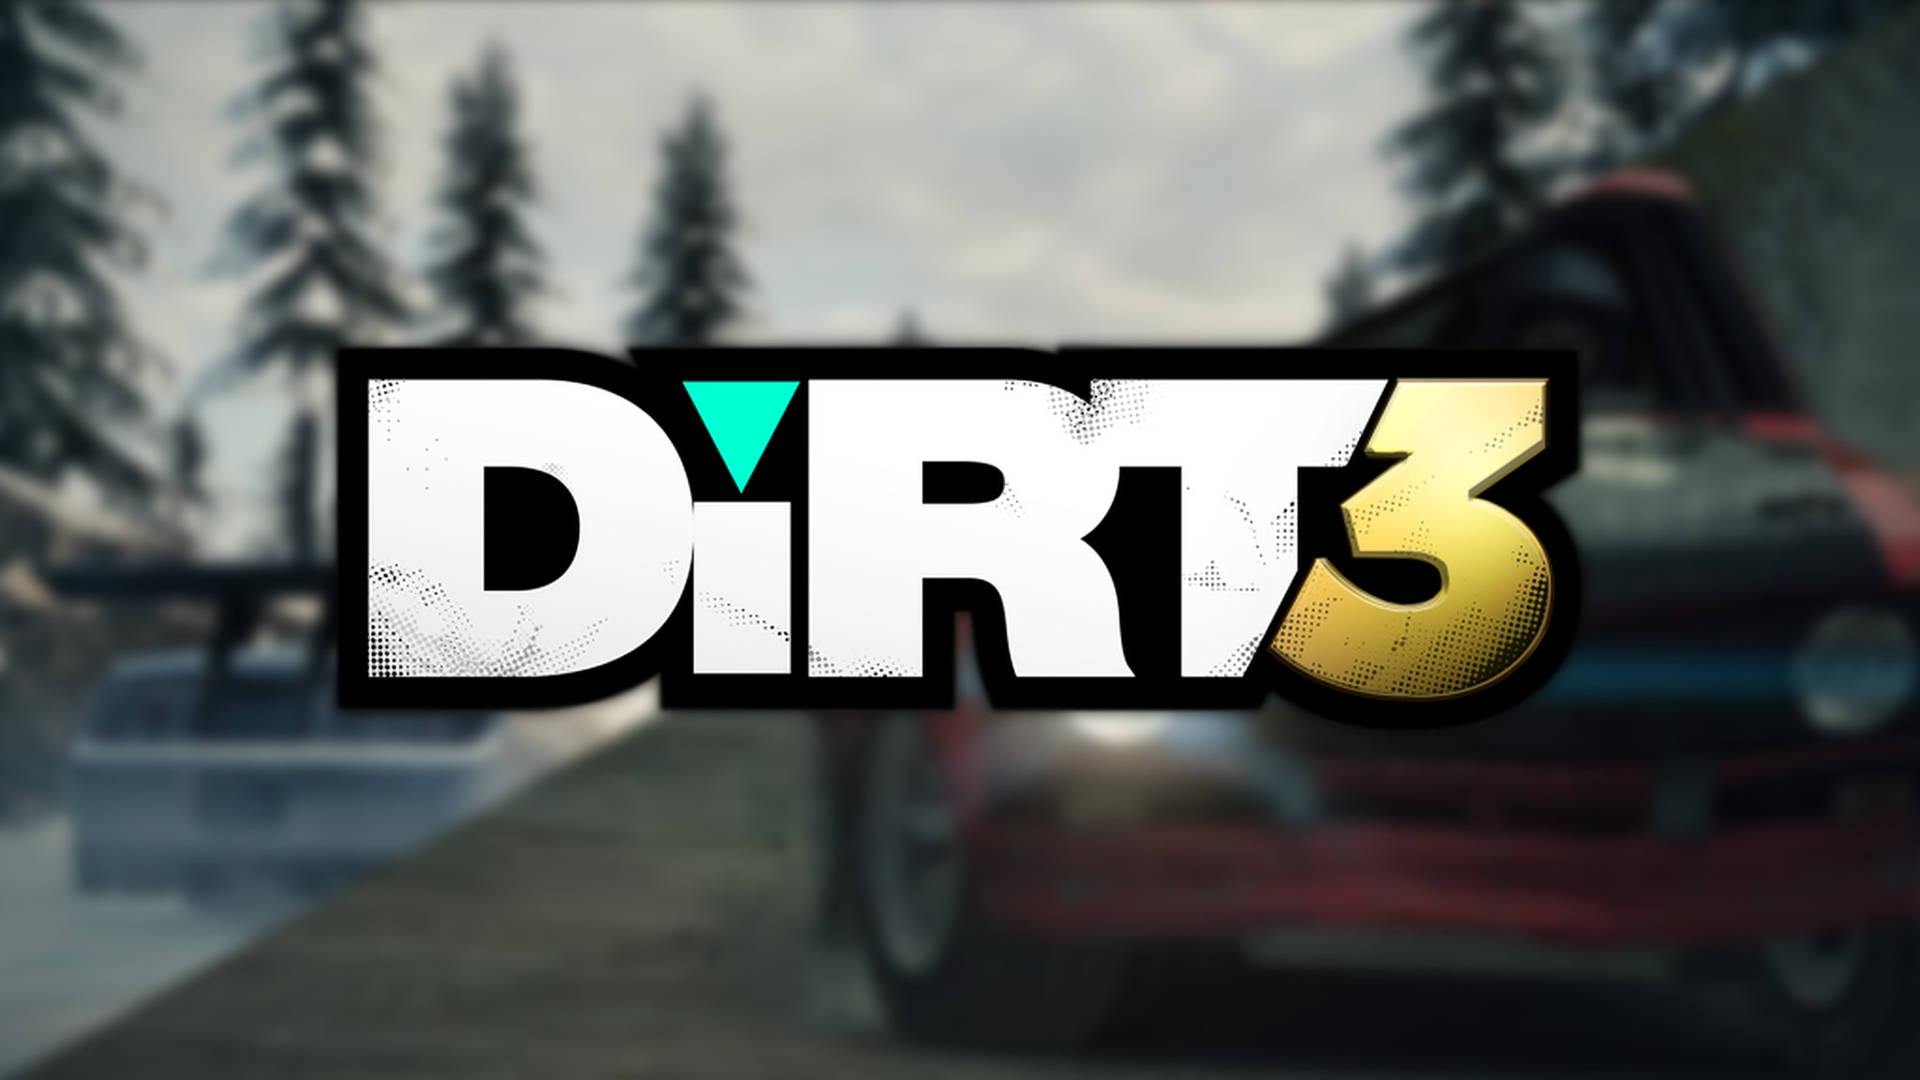 Dirt 3 2048X1152 Wallpaper and Background Image